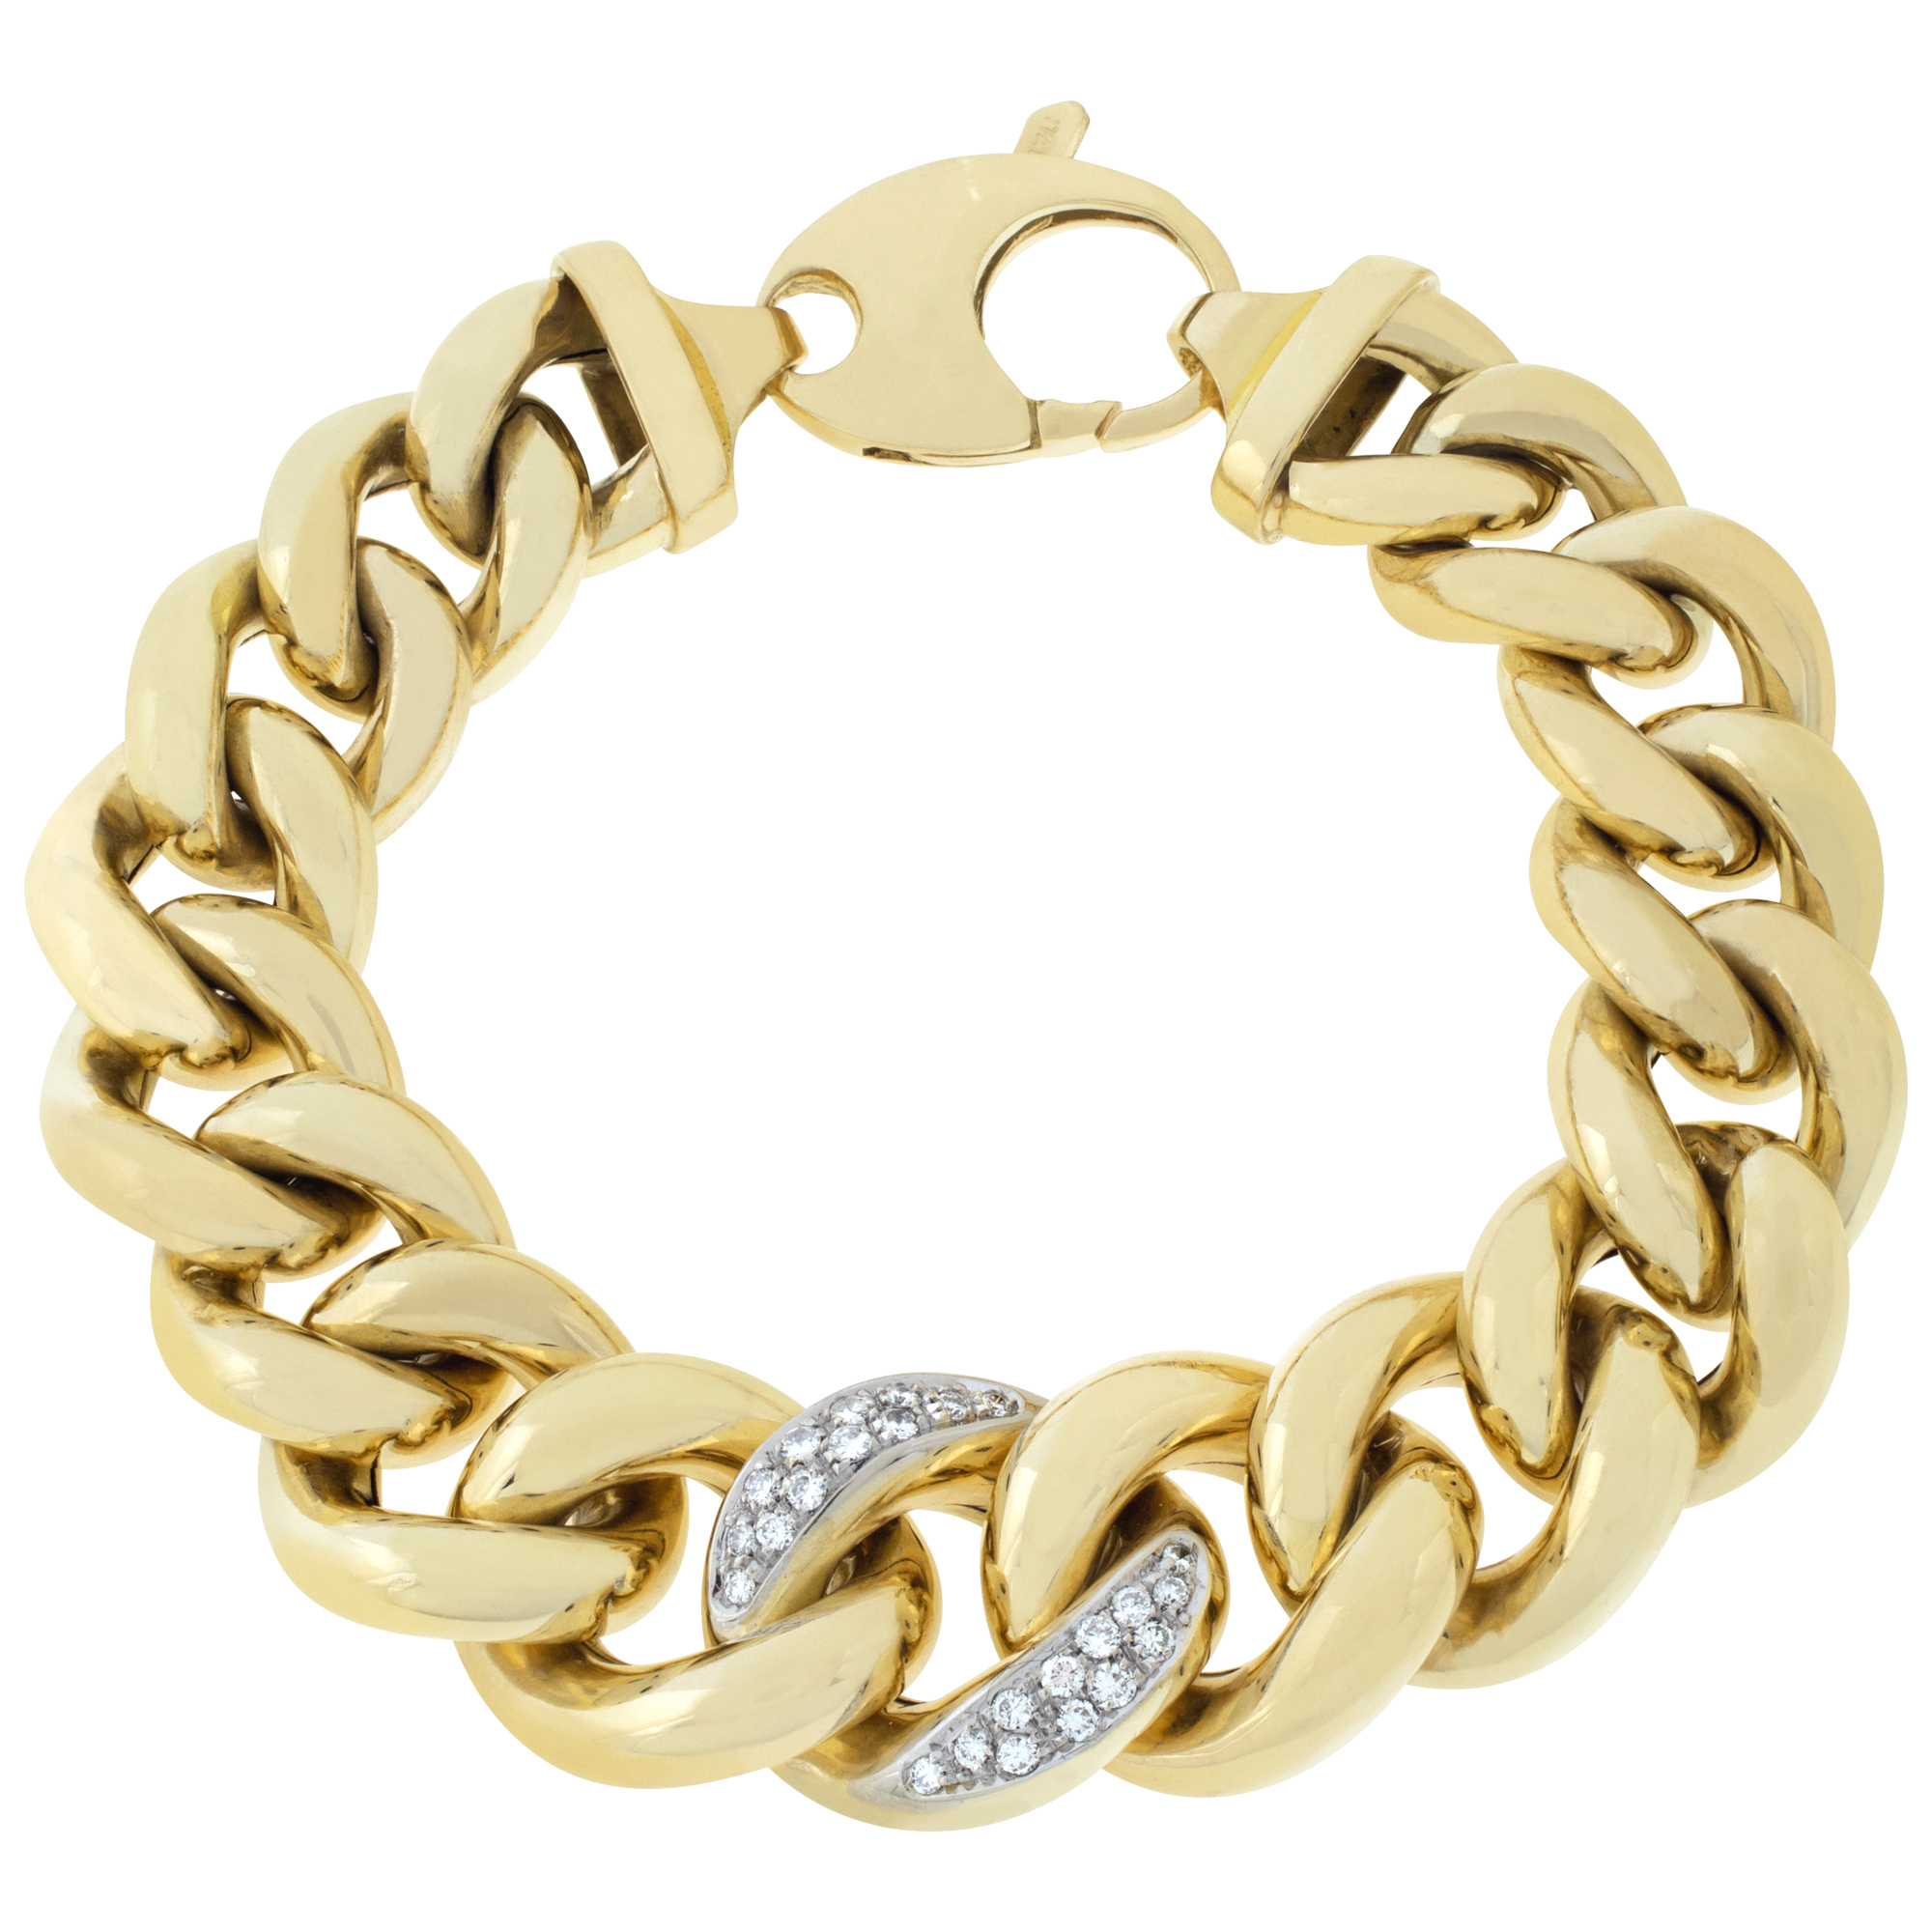 Light Weight 18k chain bracelet with pave diamond accents image 1